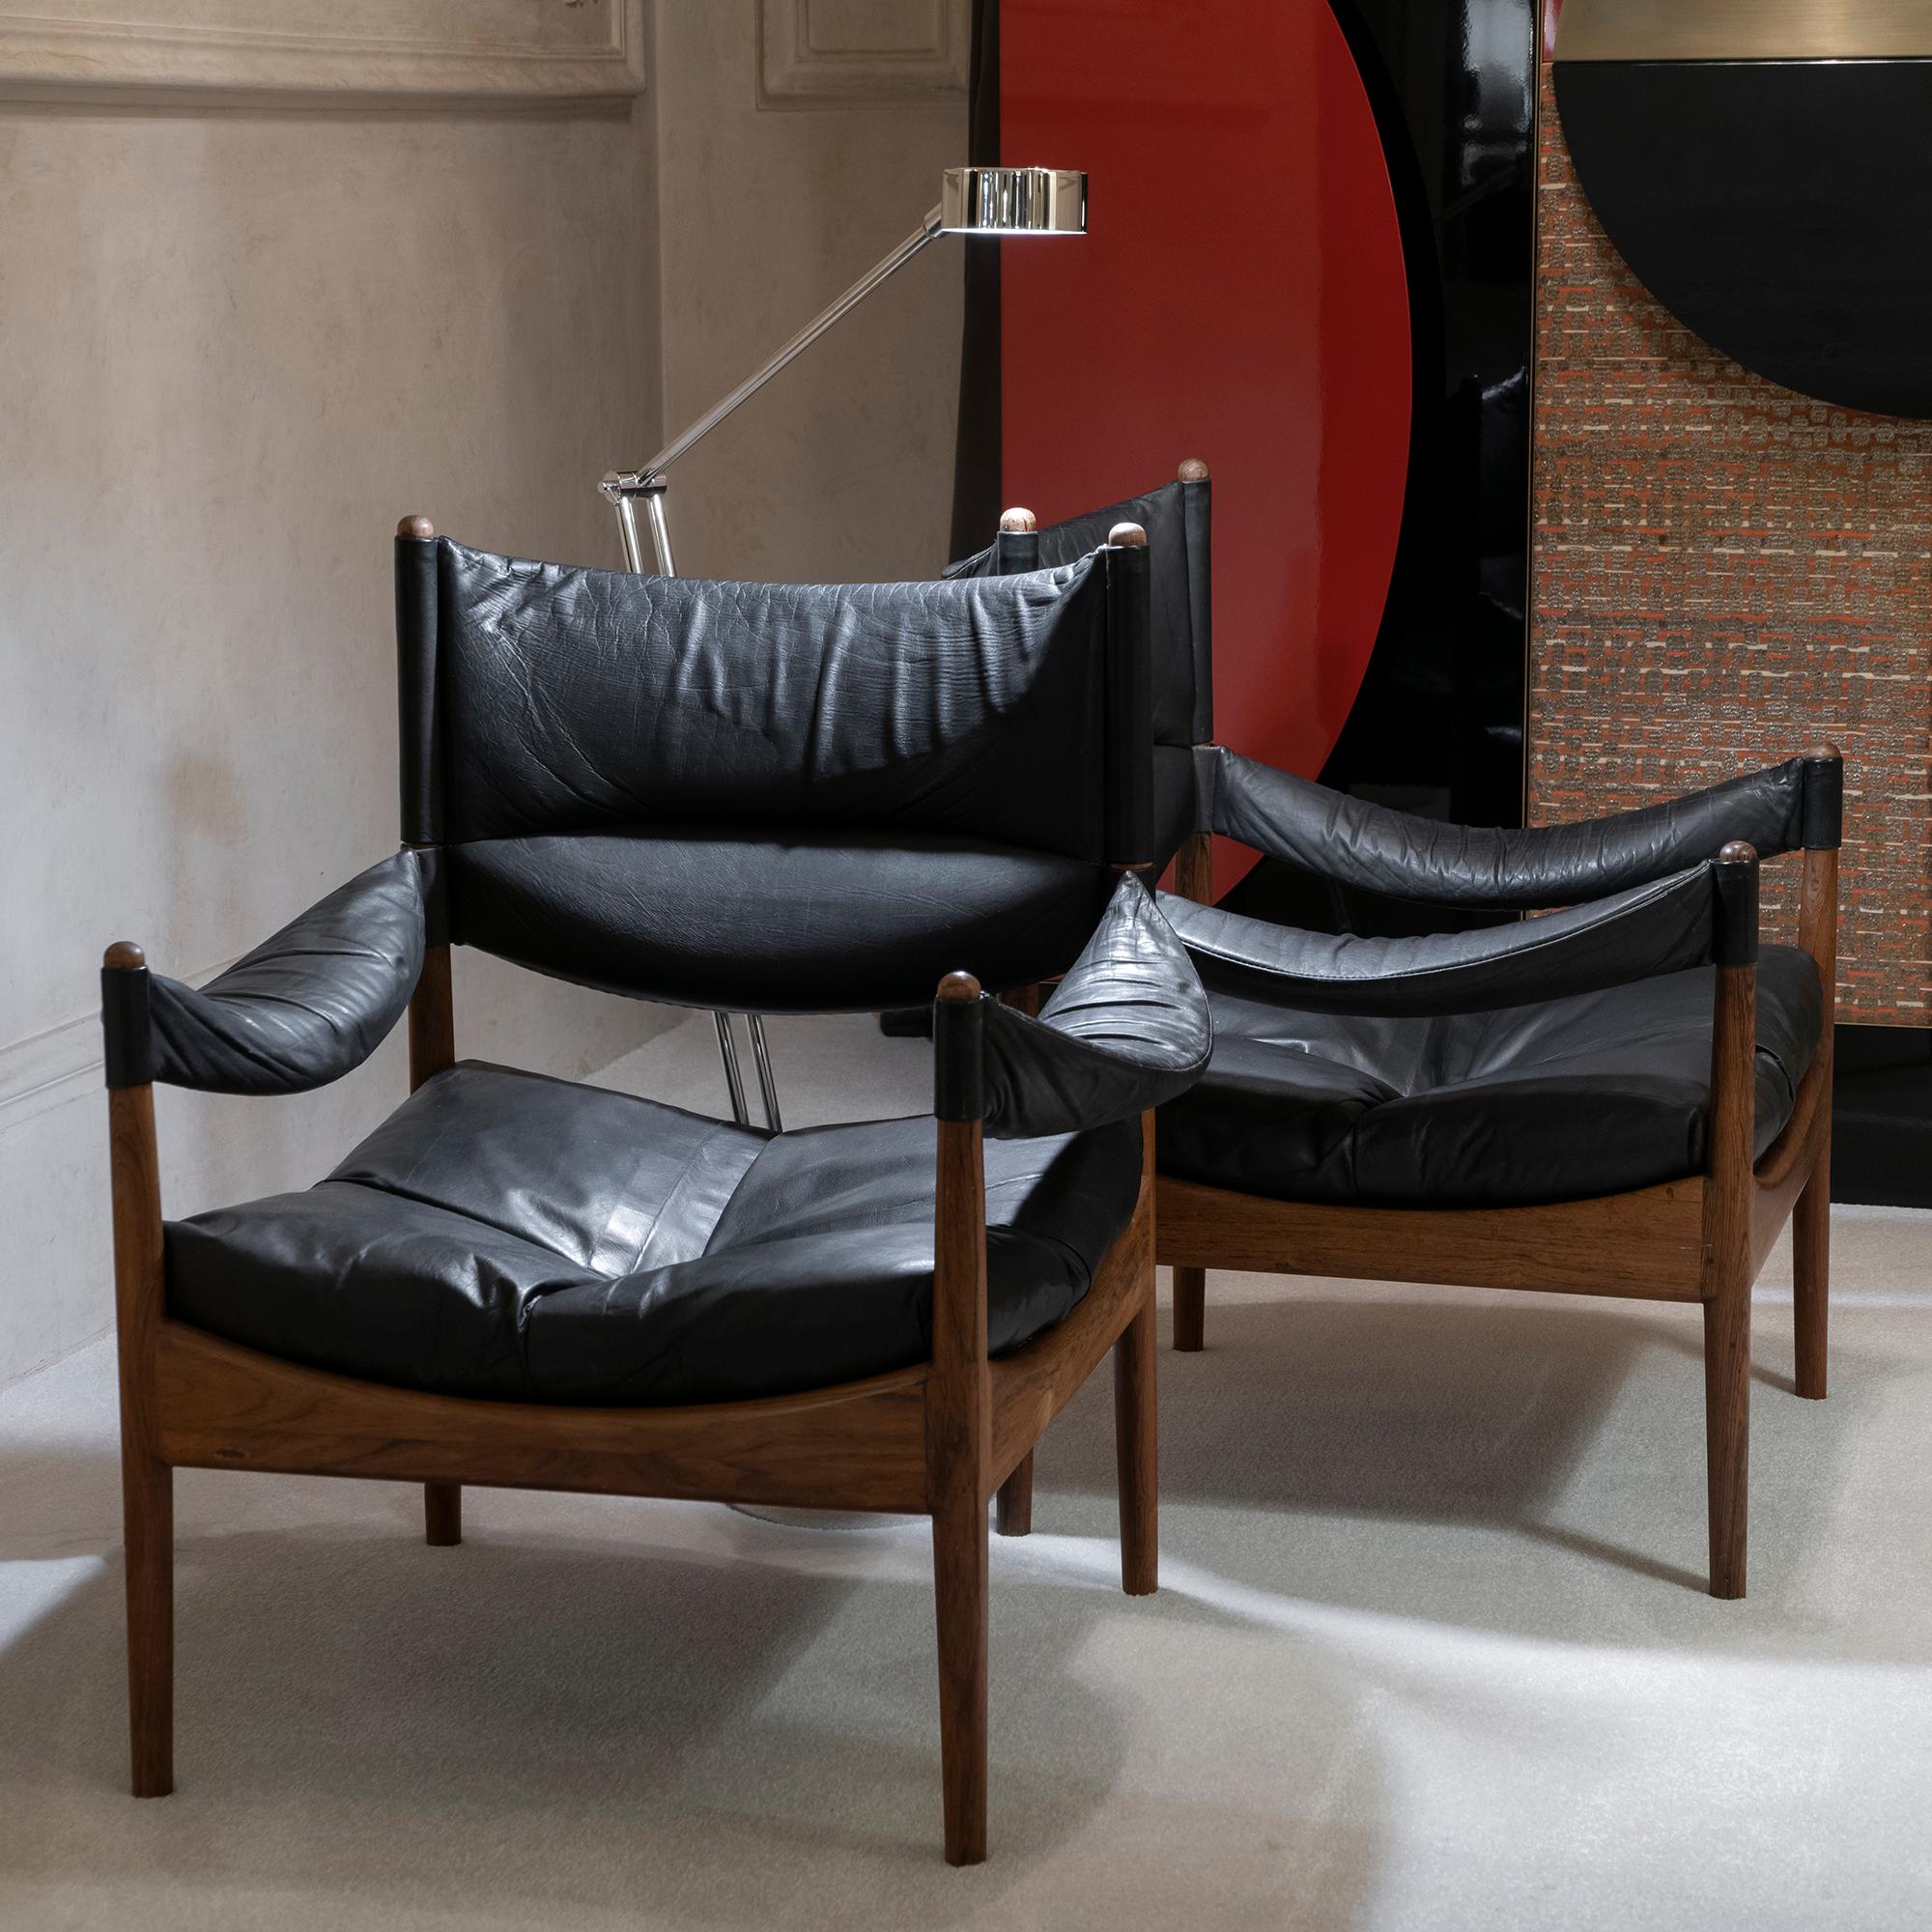 Pair of Scandinavian Mid-Century Modern lounge chairs model modus in oak and original patined black leather designed by Kristian Vedel, produced by Søren Willadsen møbelfabrik in Denmark, perfect condition and vintage patina.